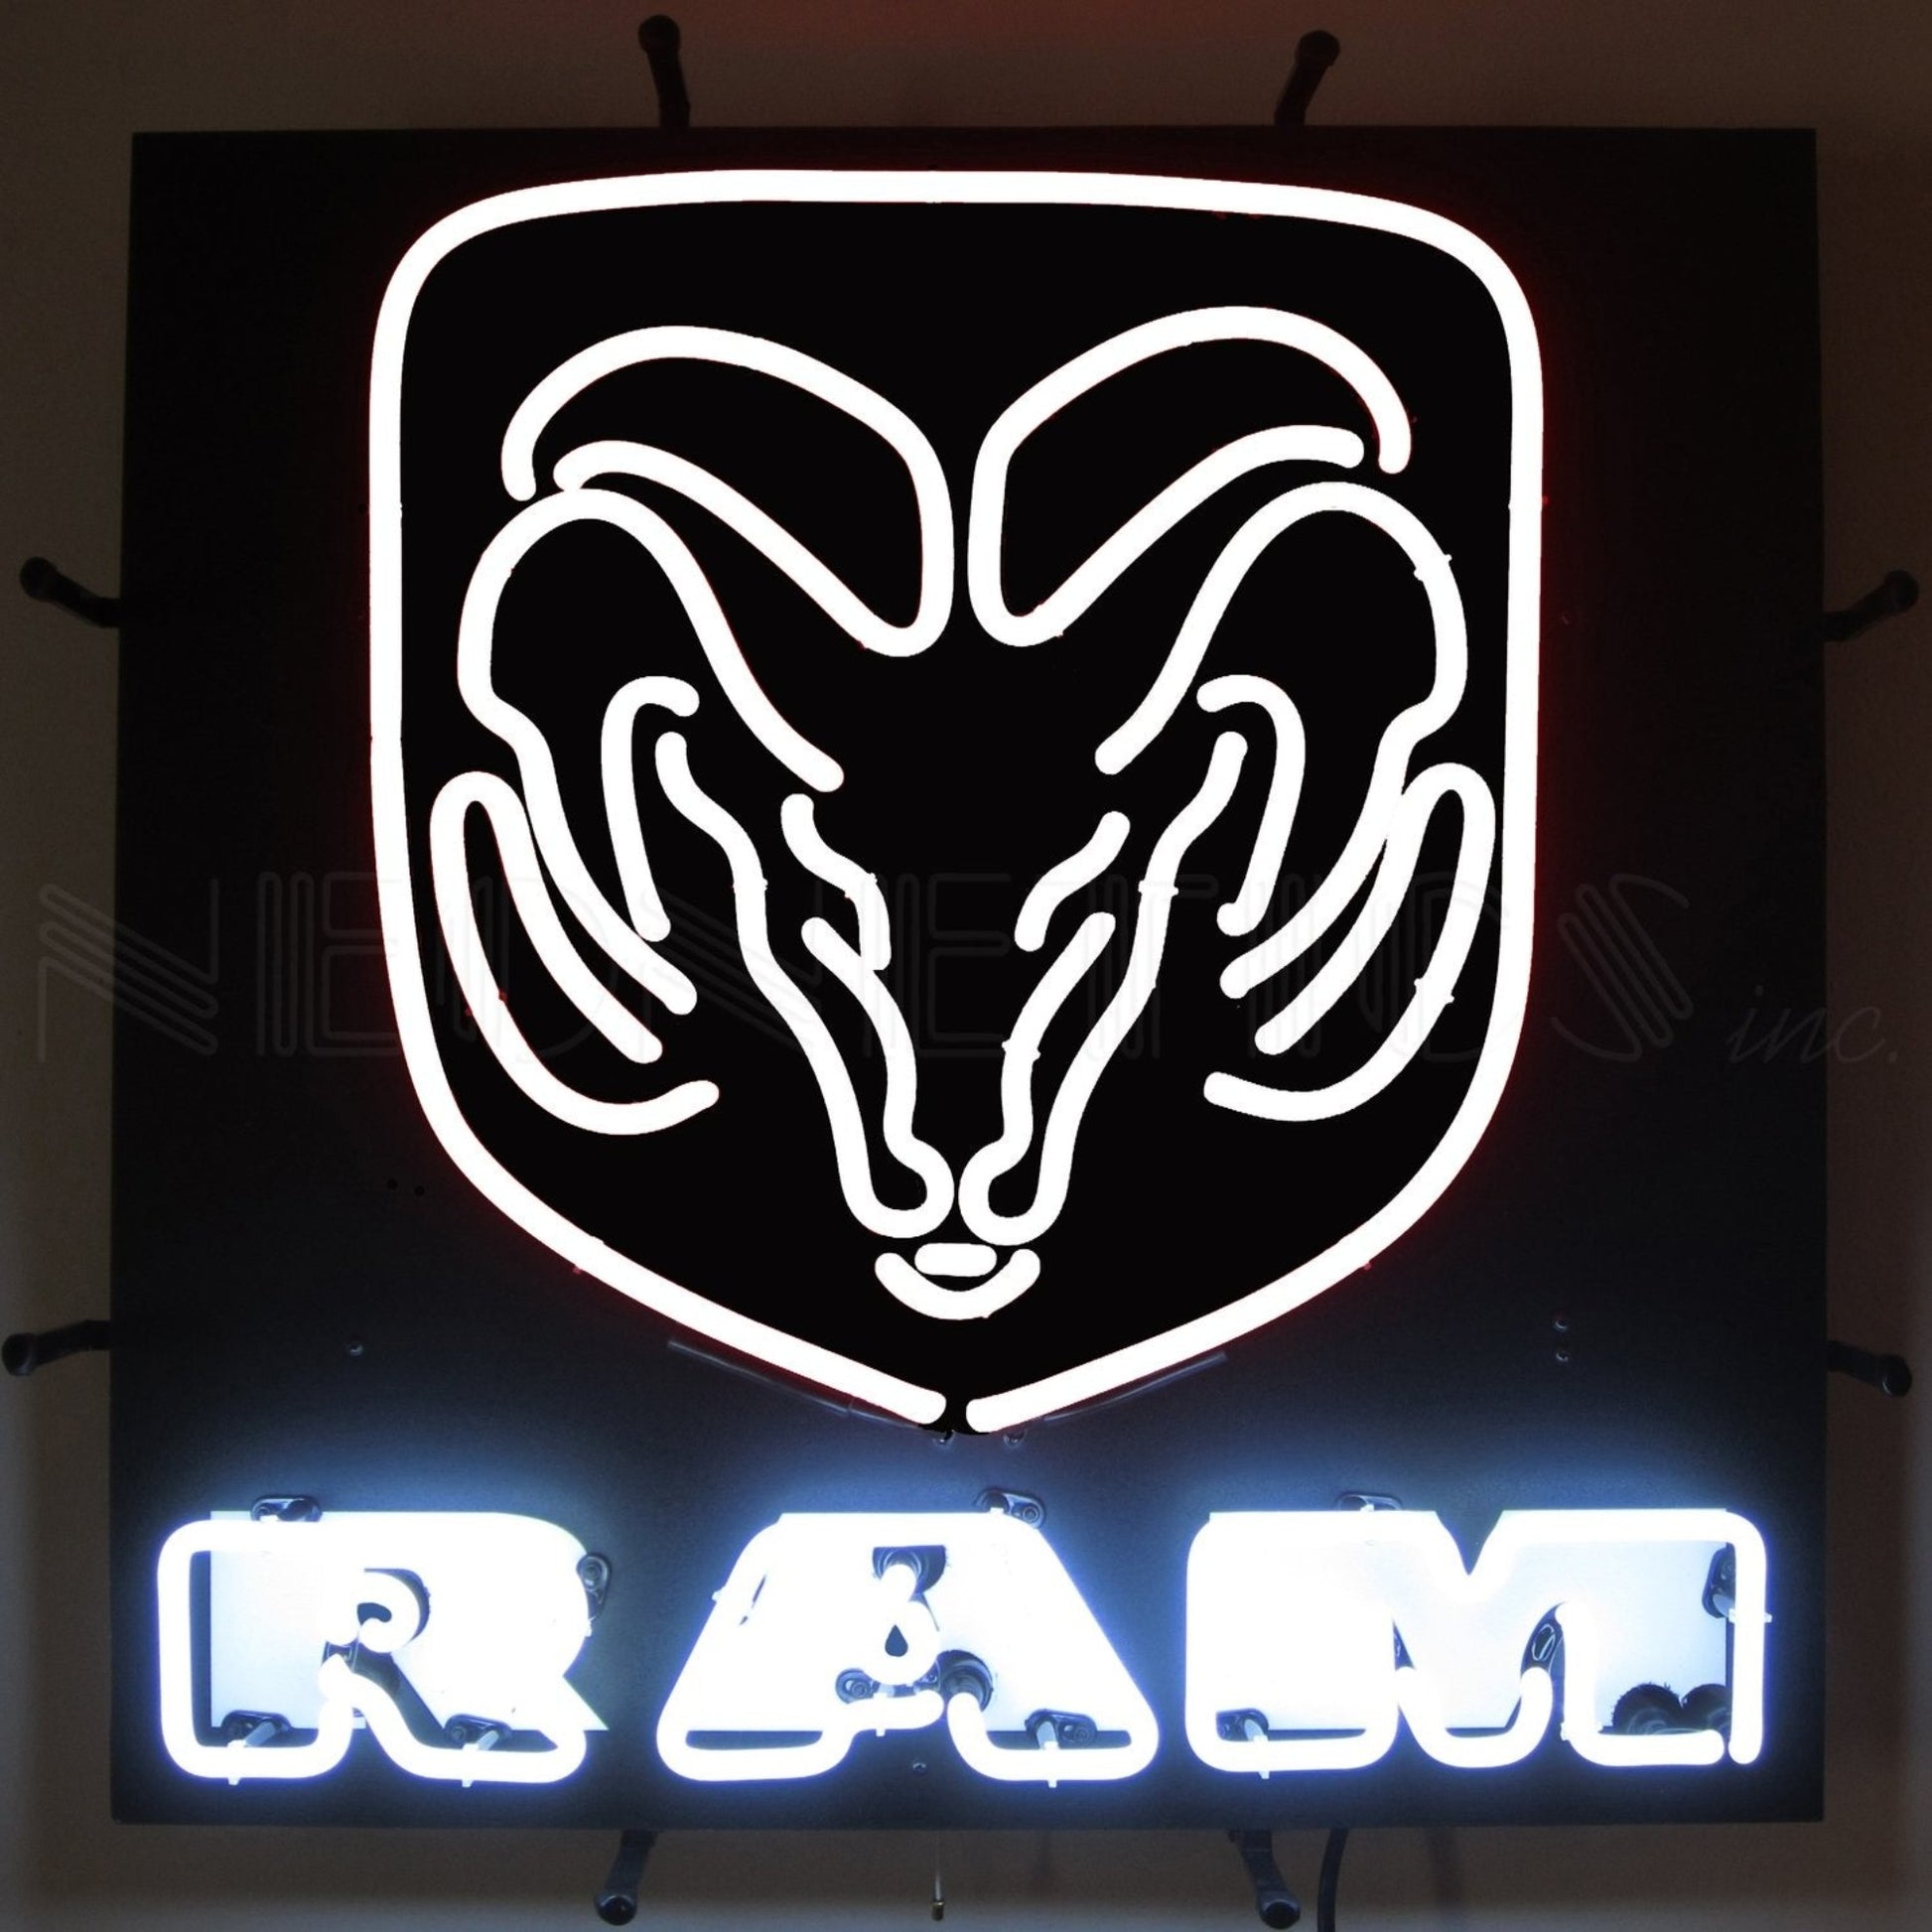 Striking RAM White Neon Sign featuring the iconic ram's head logo illuminated in brilliant white light, an electrifying addition to any modern decor.